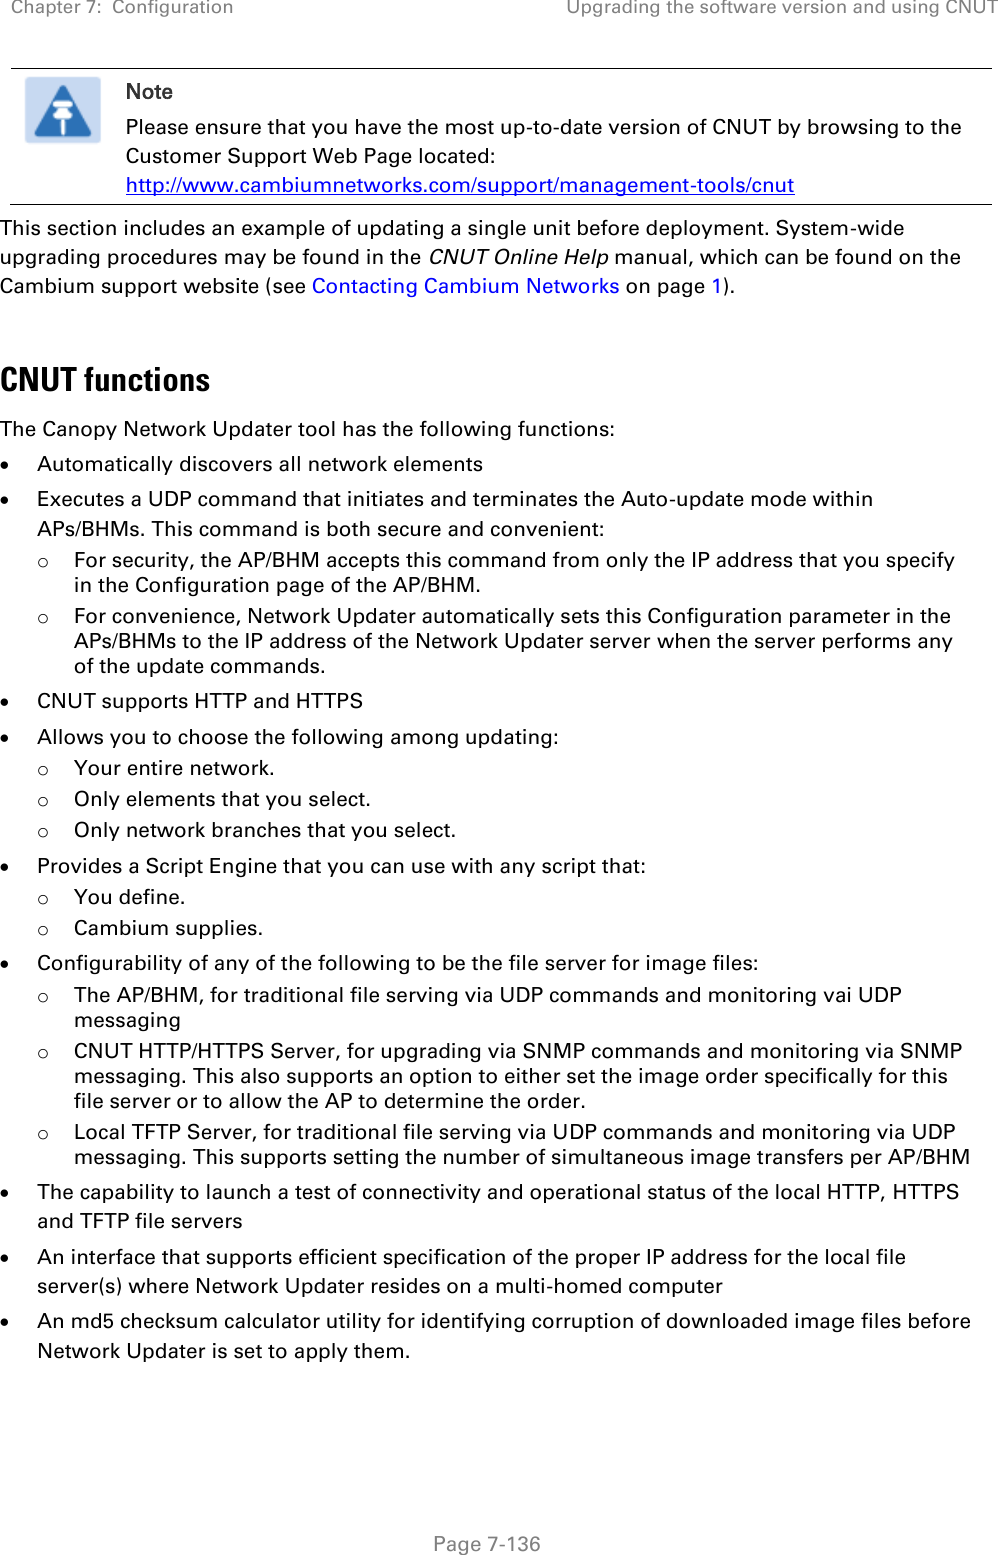 Chapter 7:  Configuration Upgrading the software version and using CNUT   Page 7-136  Note Please ensure that you have the most up-to-date version of CNUT by browsing to the Customer Support Web Page located: http://www.cambiumnetworks.com/support/management-tools/cnut This section includes an example of updating a single unit before deployment. System-wide upgrading procedures may be found in the CNUT Online Help manual, which can be found on the Cambium support website (see Contacting Cambium Networks on page 1).  CNUT functions The Canopy Network Updater tool has the following functions:  Automatically discovers all network elements  Executes a UDP command that initiates and terminates the Auto-update mode within APs/BHMs. This command is both secure and convenient: o For security, the AP/BHM accepts this command from only the IP address that you specify in the Configuration page of the AP/BHM.  o For convenience, Network Updater automatically sets this Configuration parameter in the APs/BHMs to the IP address of the Network Updater server when the server performs any of the update commands.  CNUT supports HTTP and HTTPS  Allows you to choose the following among updating: o Your entire network. o Only elements that you select. o Only network branches that you select.  Provides a Script Engine that you can use with any script that: o You define. o Cambium supplies.  Configurability of any of the following to be the file server for image files: o The AP/BHM, for traditional file serving via UDP commands and monitoring vai UDP messaging o CNUT HTTP/HTTPS Server, for upgrading via SNMP commands and monitoring via SNMP messaging. This also supports an option to either set the image order specifically for this file server or to allow the AP to determine the order. o Local TFTP Server, for traditional file serving via UDP commands and monitoring via UDP messaging. This supports setting the number of simultaneous image transfers per AP/BHM  The capability to launch a test of connectivity and operational status of the local HTTP, HTTPS and TFTP file servers  An interface that supports efficient specification of the proper IP address for the local file server(s) where Network Updater resides on a multi-homed computer  An md5 checksum calculator utility for identifying corruption of downloaded image files before Network Updater is set to apply them. 